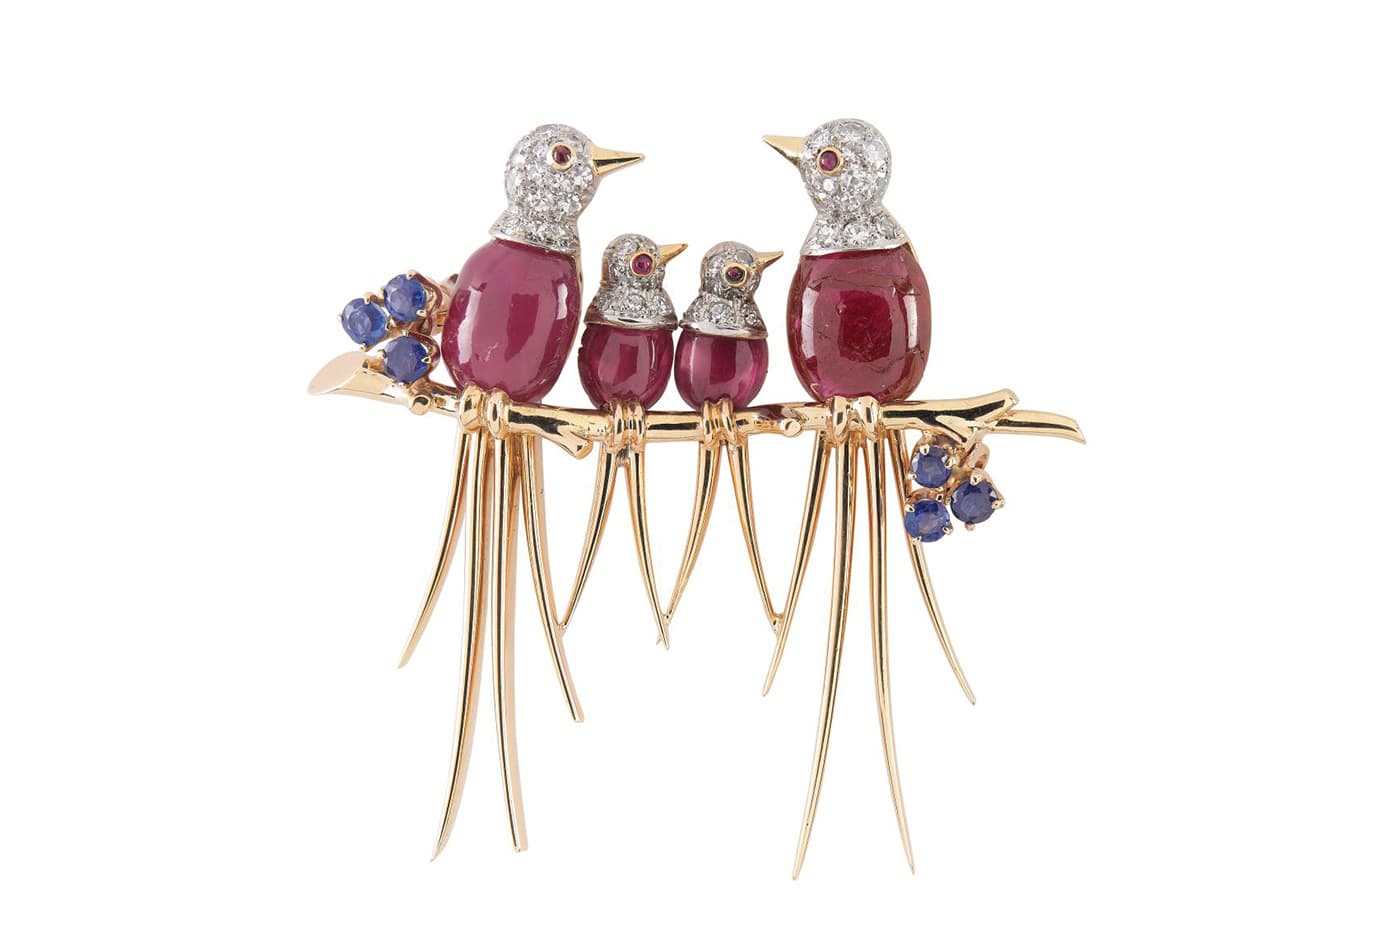 Van Cleef & Arpels brooch with rubies, sapphires and diamonds in yellow gold and platinum from 1946